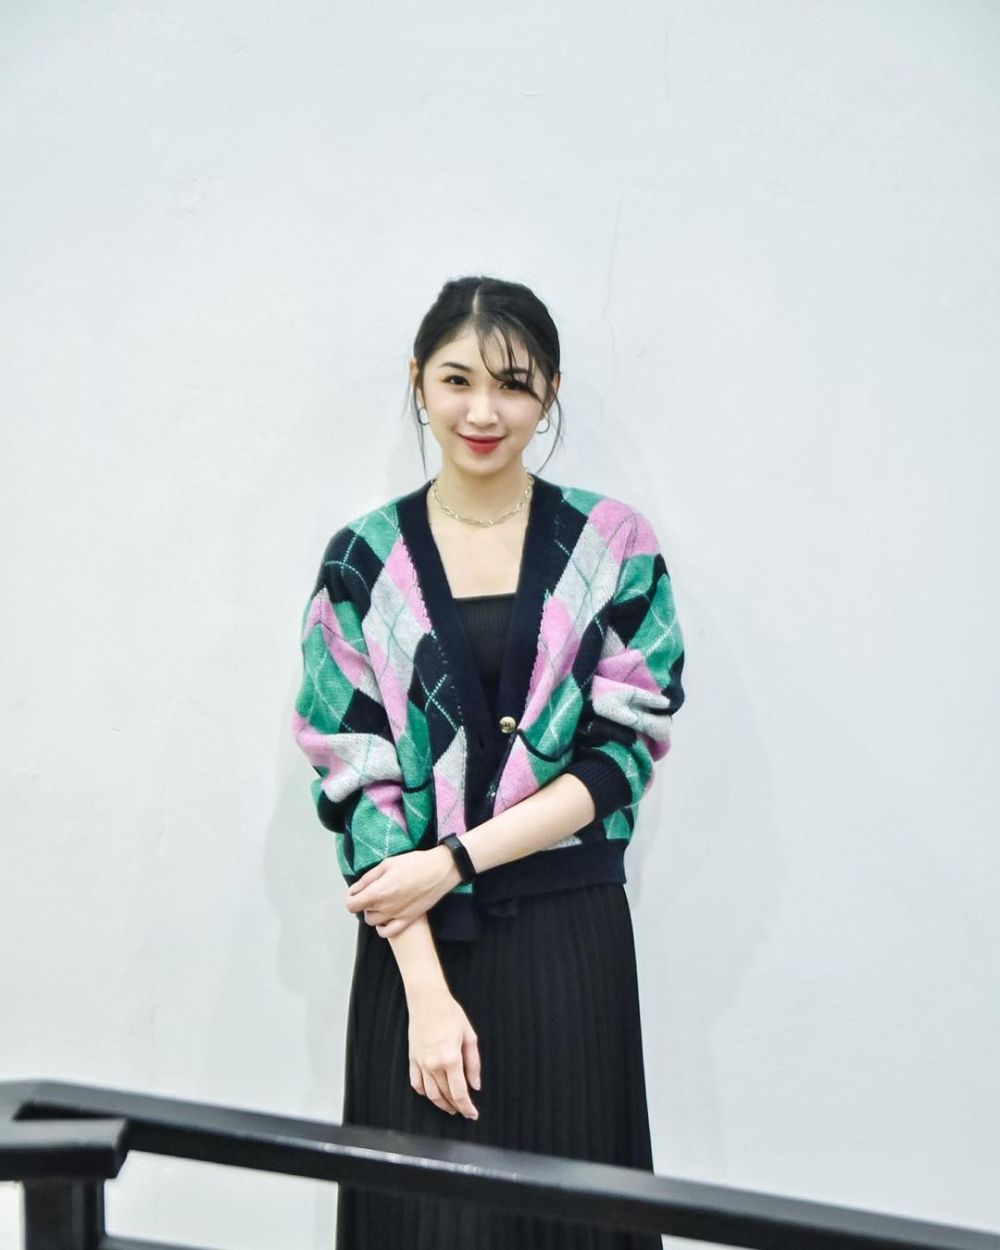 8 OOTD Campus Look Ala Shani JKT48, Simple But Chic!